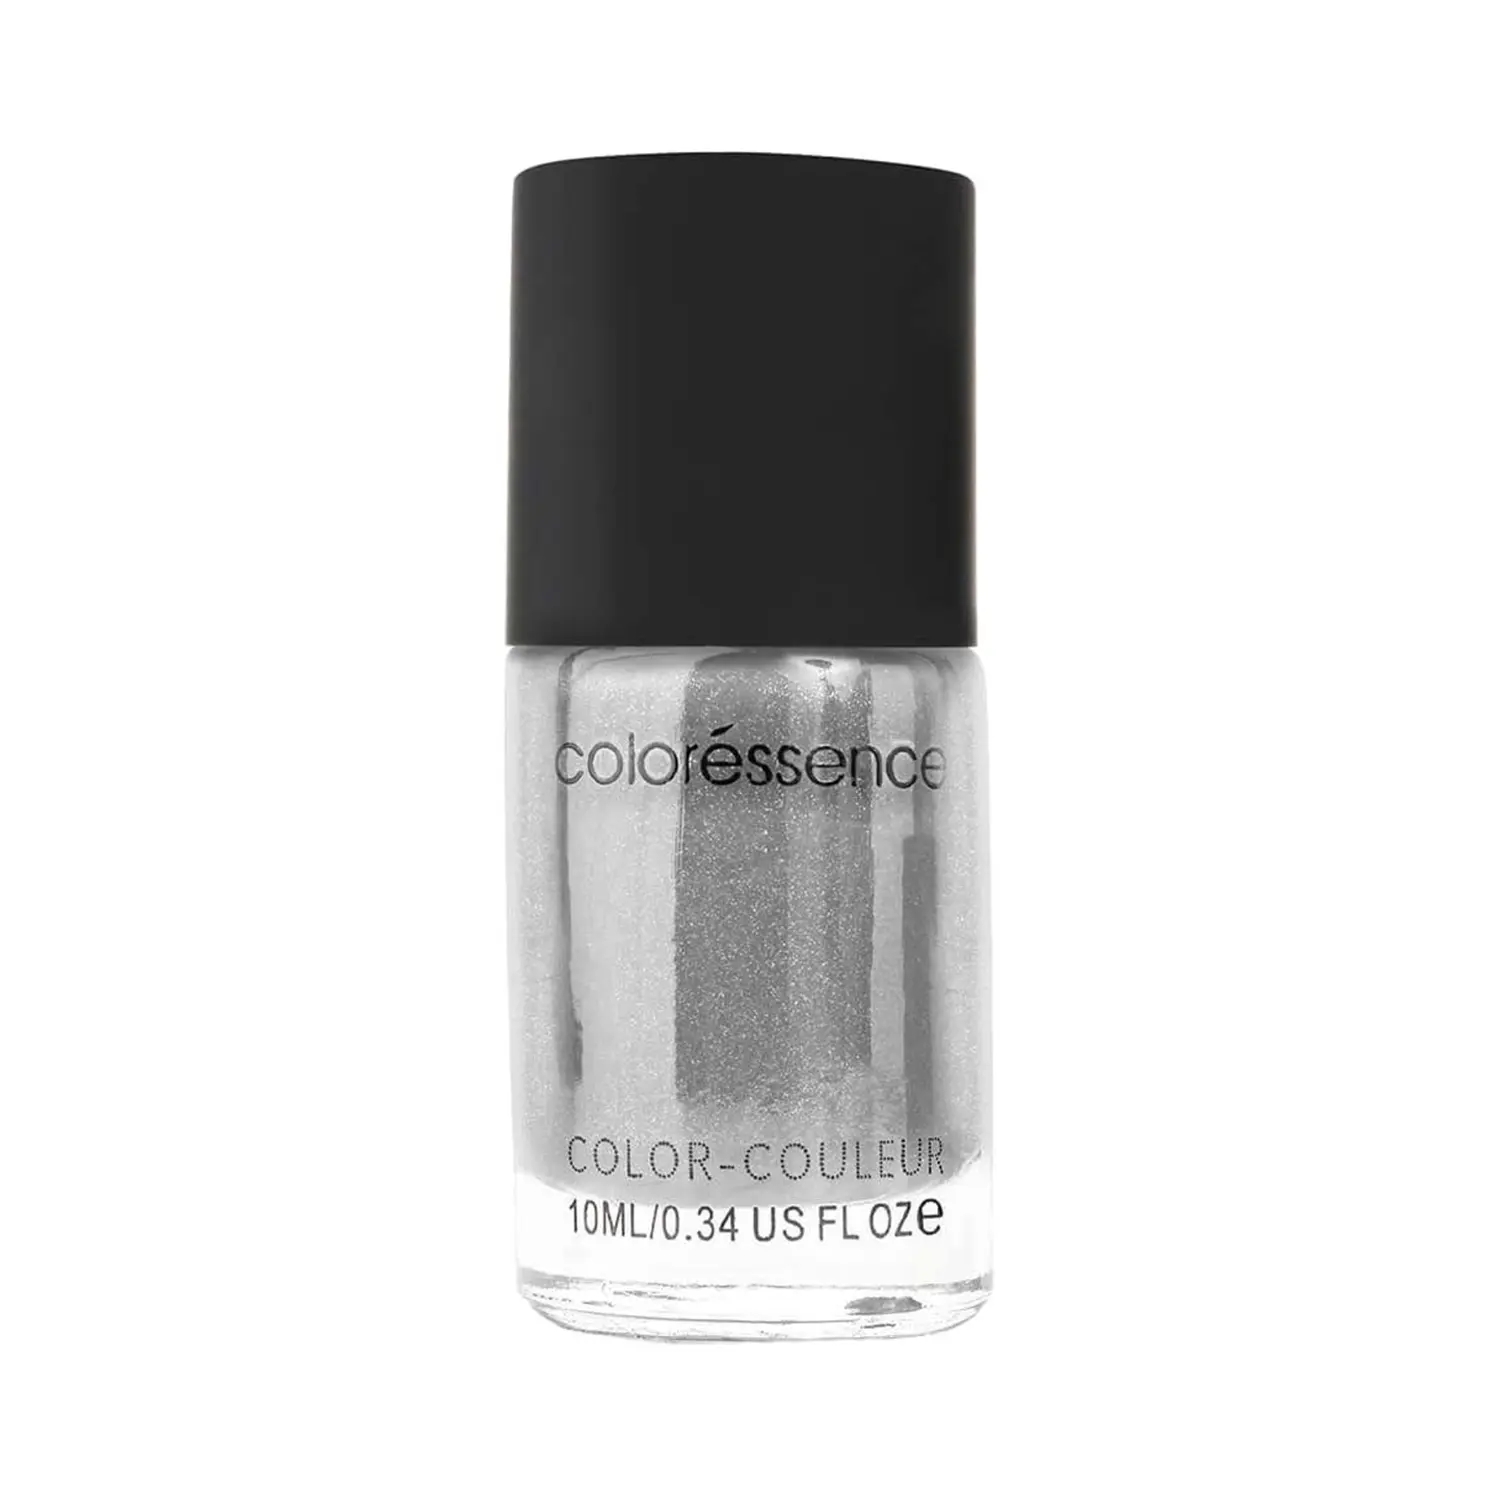 Coloressence Dazzle Diva Shimmer Finish Nail Paint (Rose Quartz) Price -  Buy Online at Best Price in India